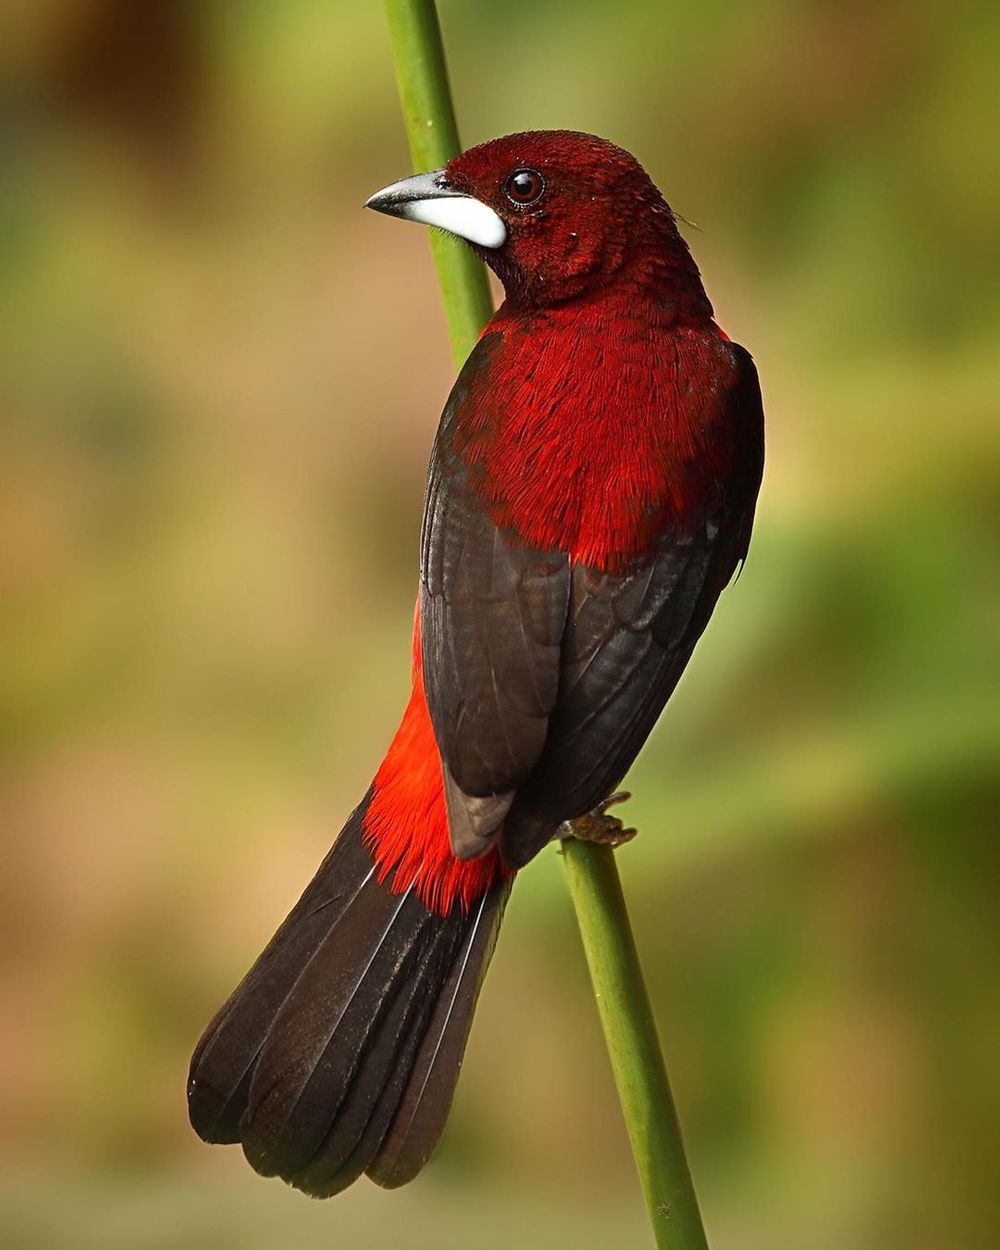 A Sublime Bird The CrimsonBacked Tanager Is An Enchanting Red Bird